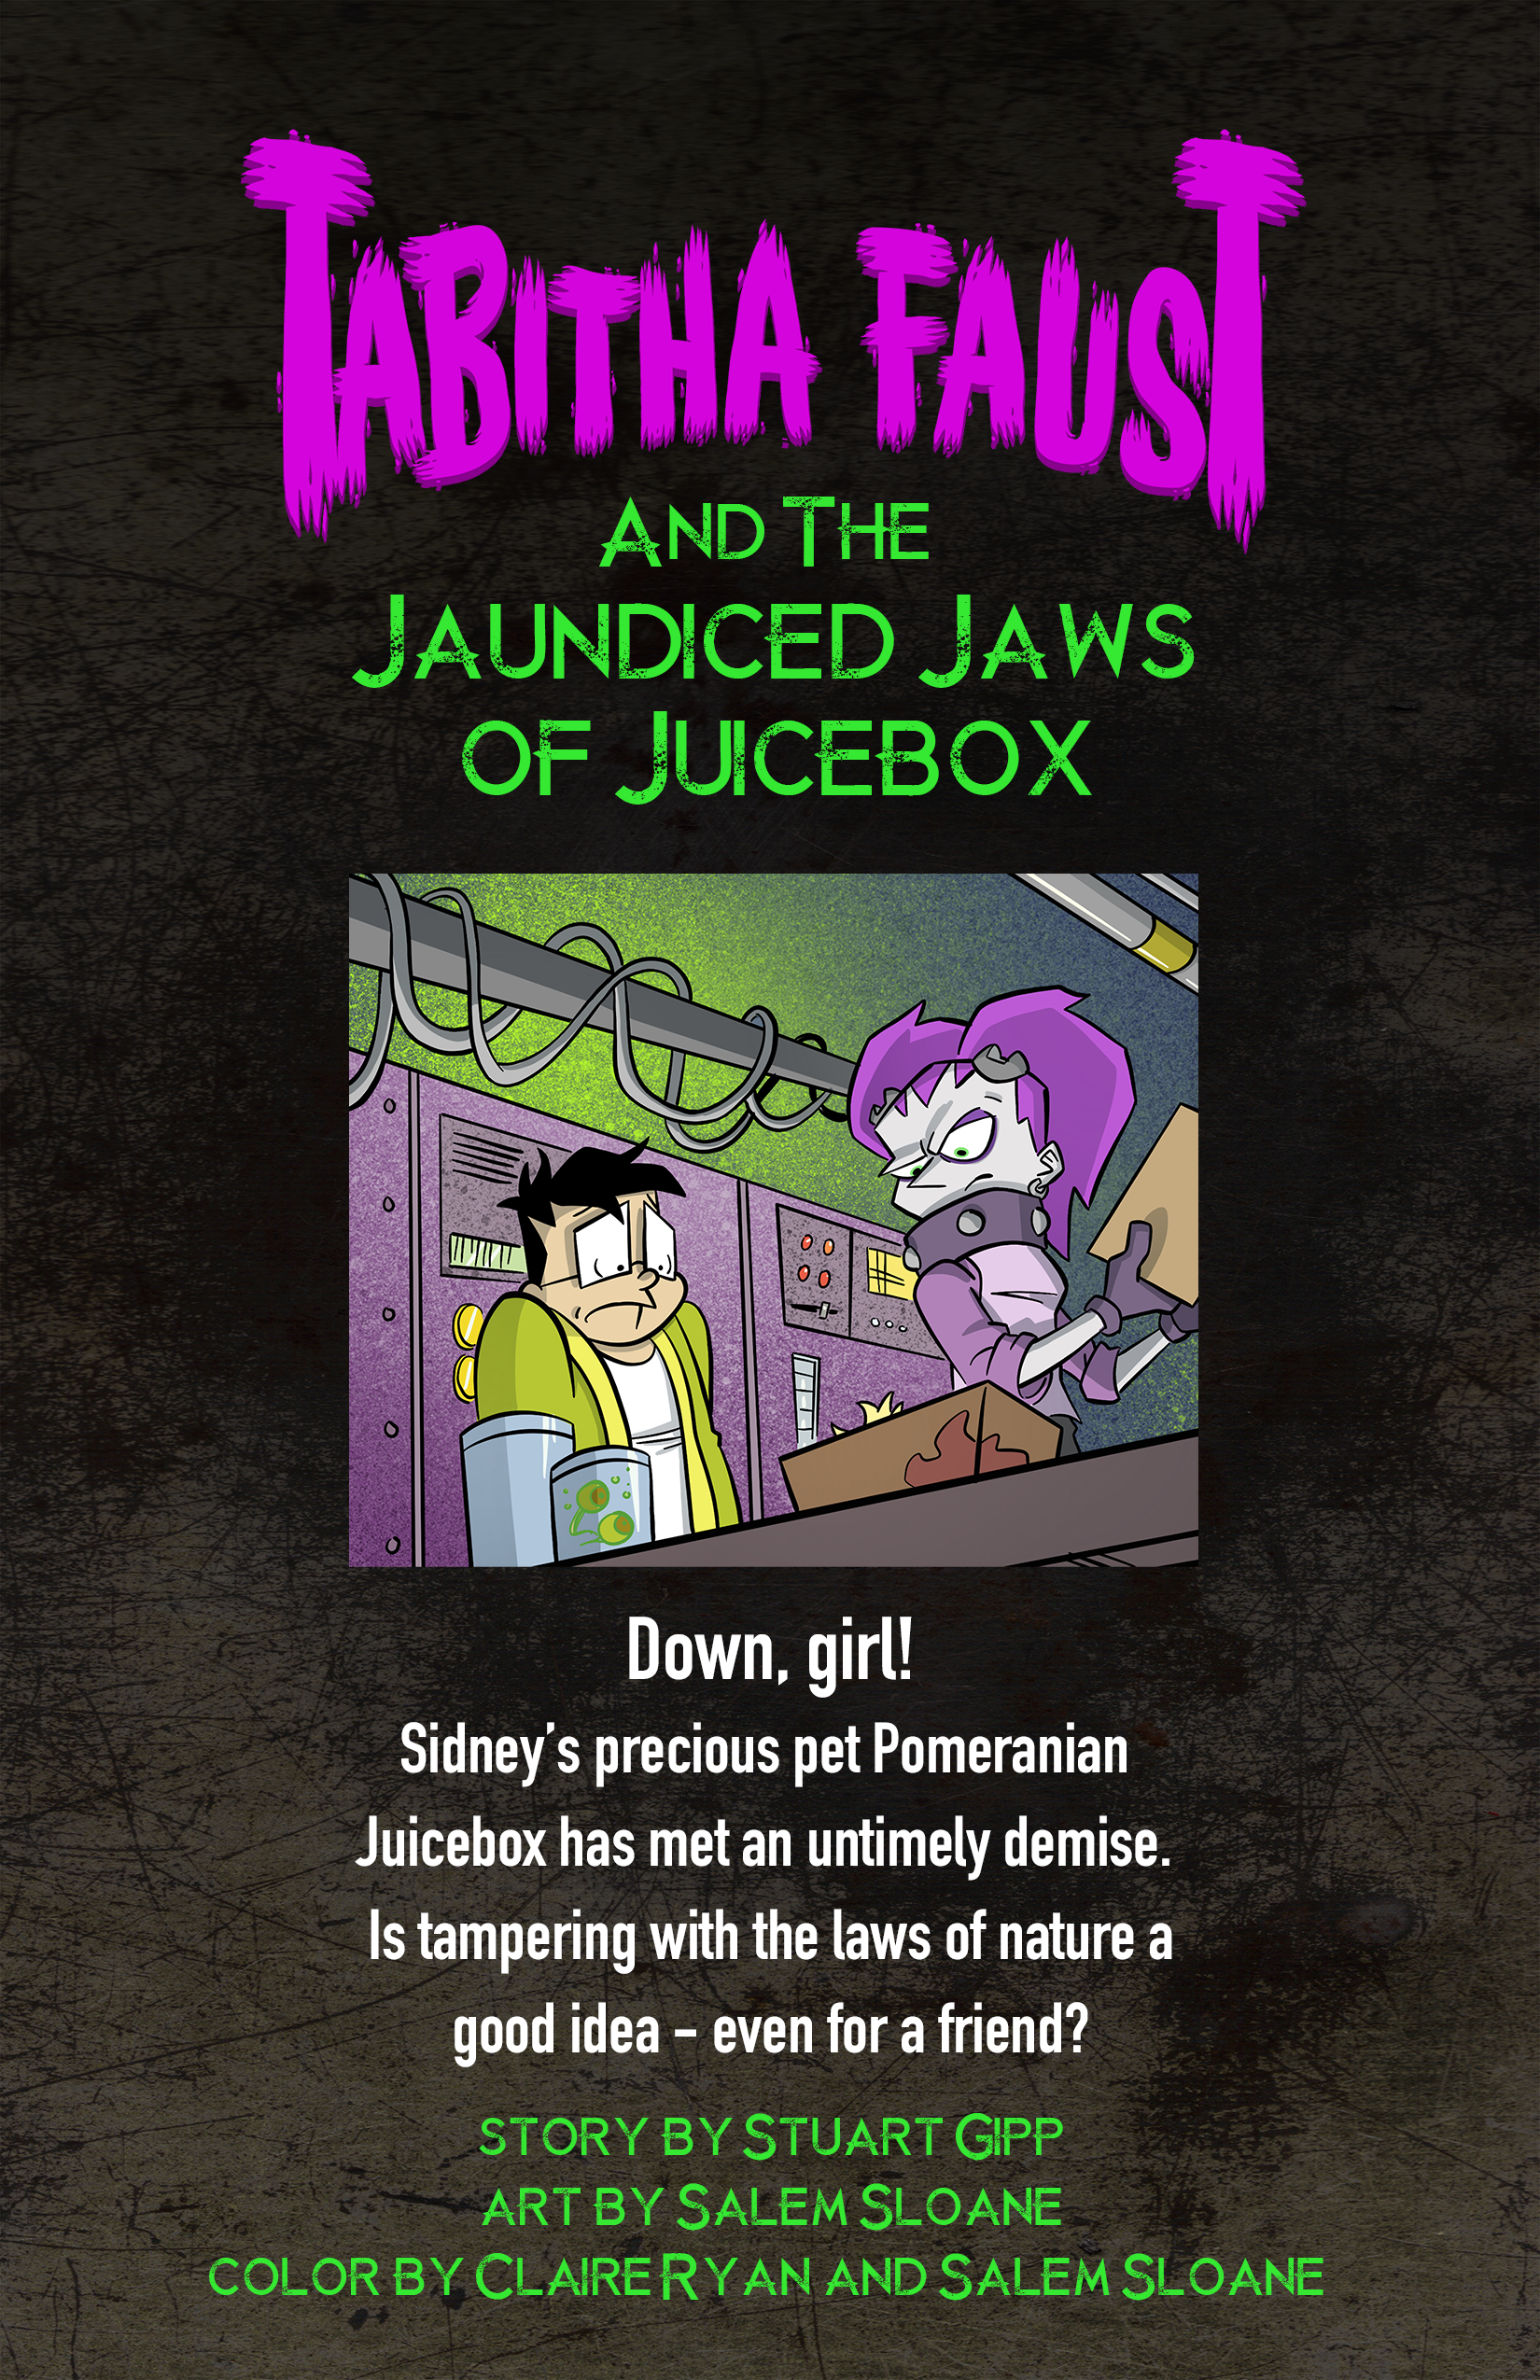 2: Tabitha Faust and the Jaundiced Jaws of Juicebox